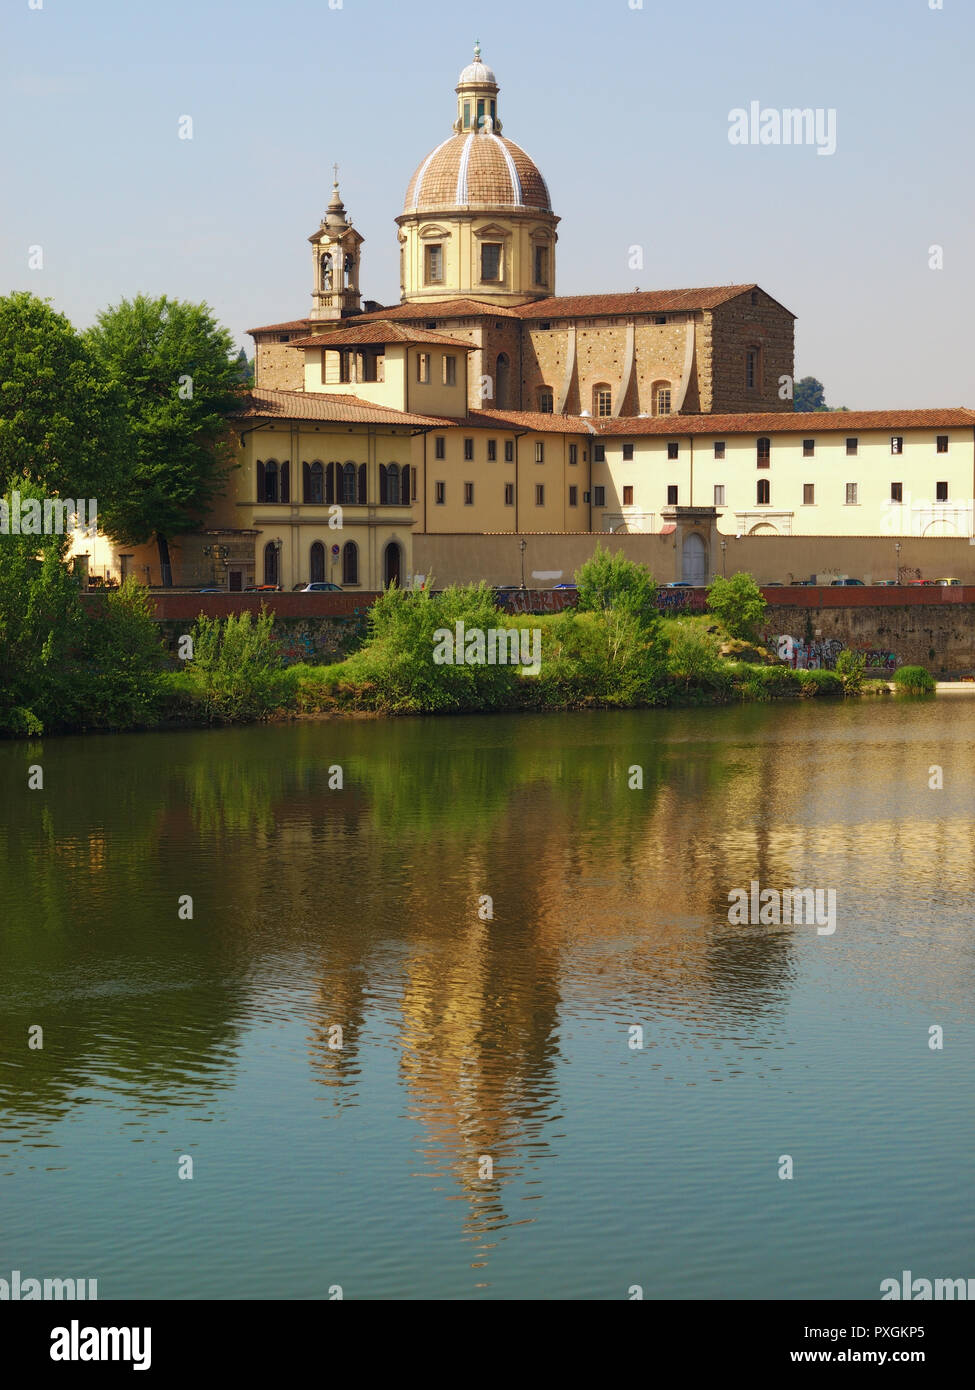 Chiesa di San Frediano in Cestello. Florence, Italie Banque D'Images